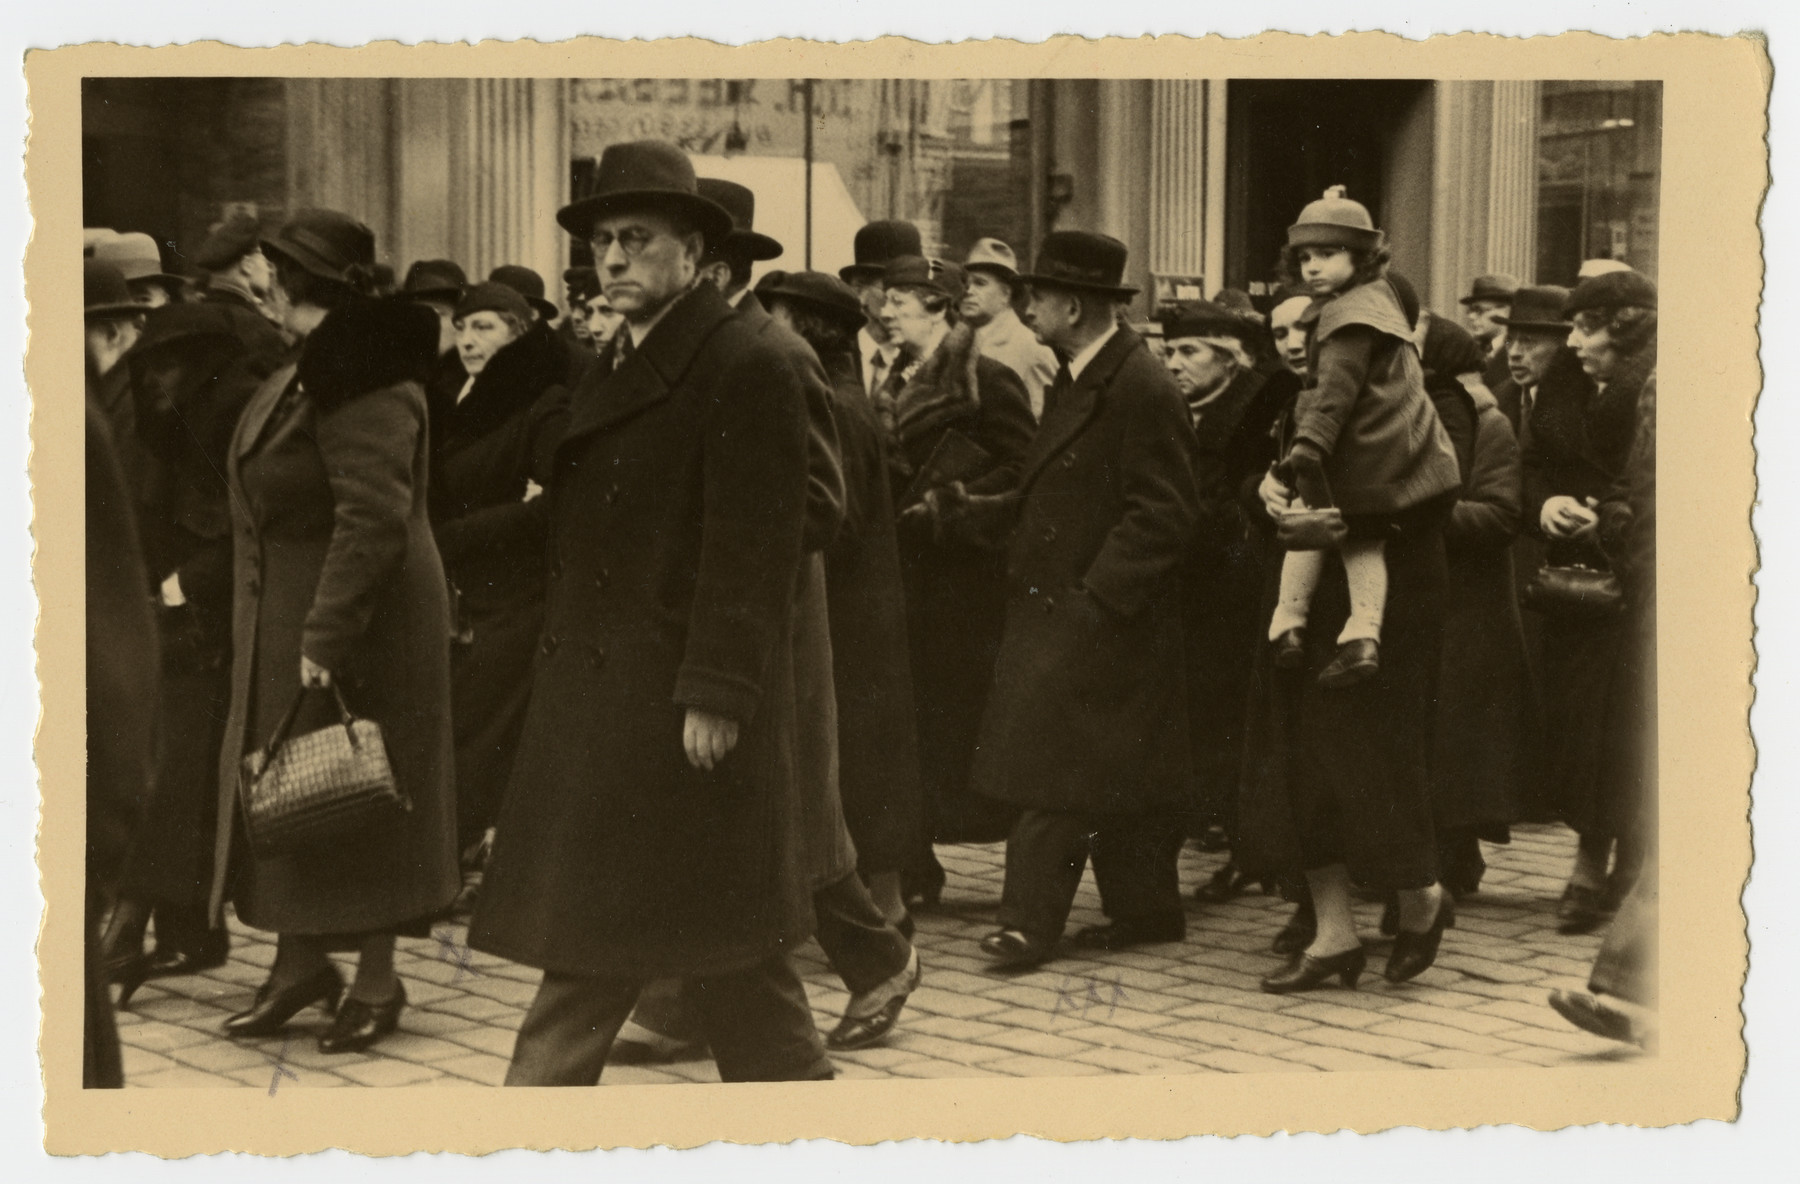 Mourners march down a street of Riga during  the funeral procession for Freida Albin.

Among those pictured are Aunt Zilla (wife of Uncle Aron); Aunt Berta Opapa; Aunt Zerna, behind her Bronja's head, and Mr. Mahler.